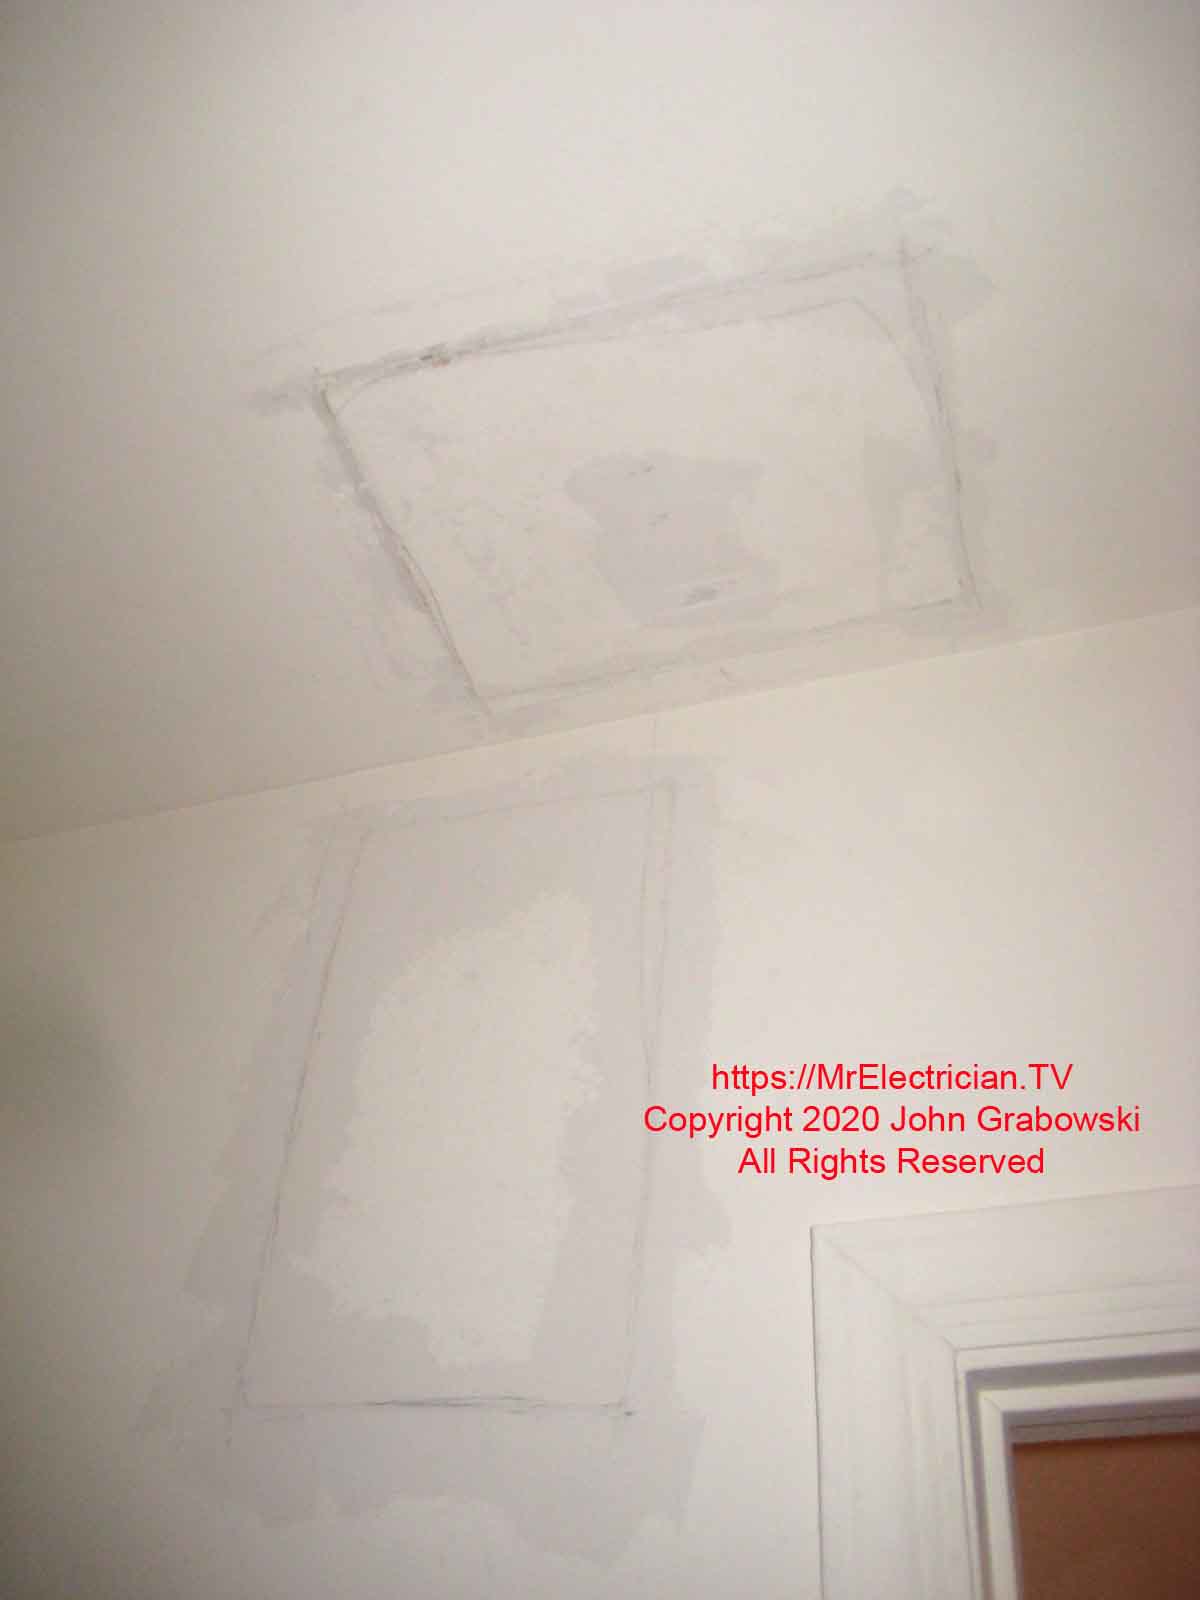 Patched holes in wall and ceiling